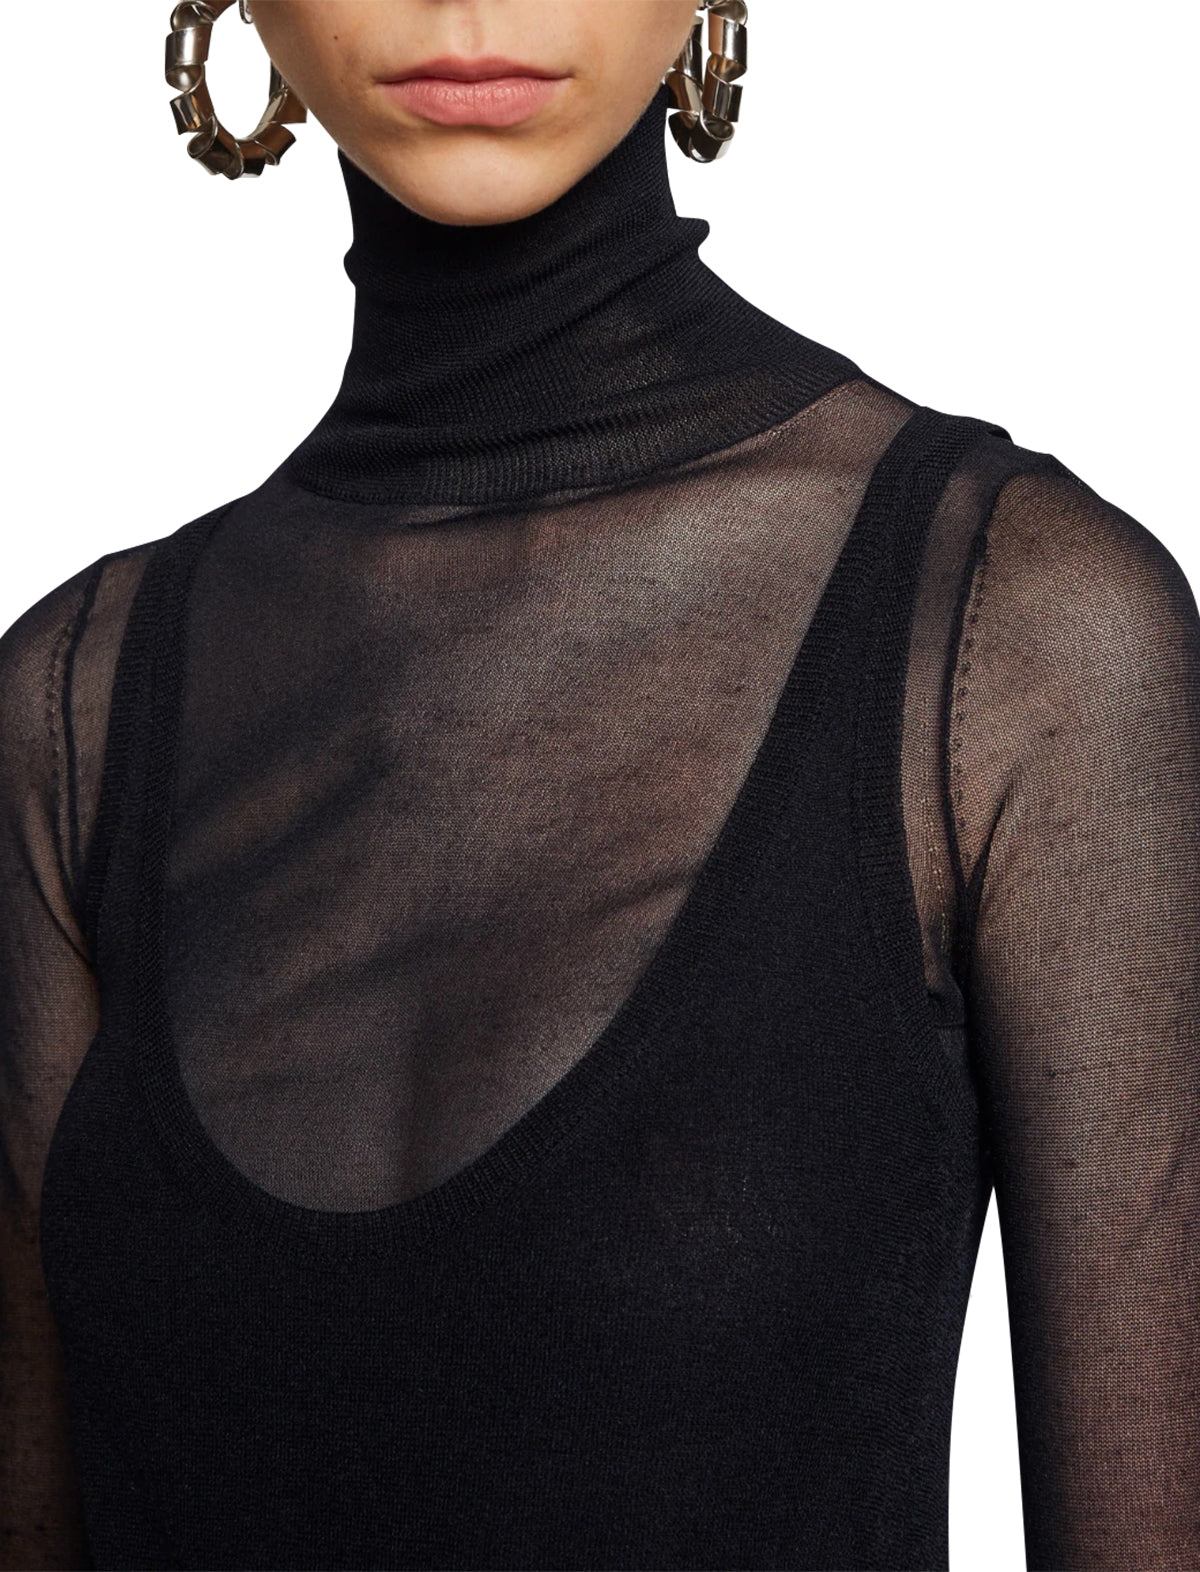 PROENZA SCHOULER WHITE LABEL T-Neck Layered Knit Top